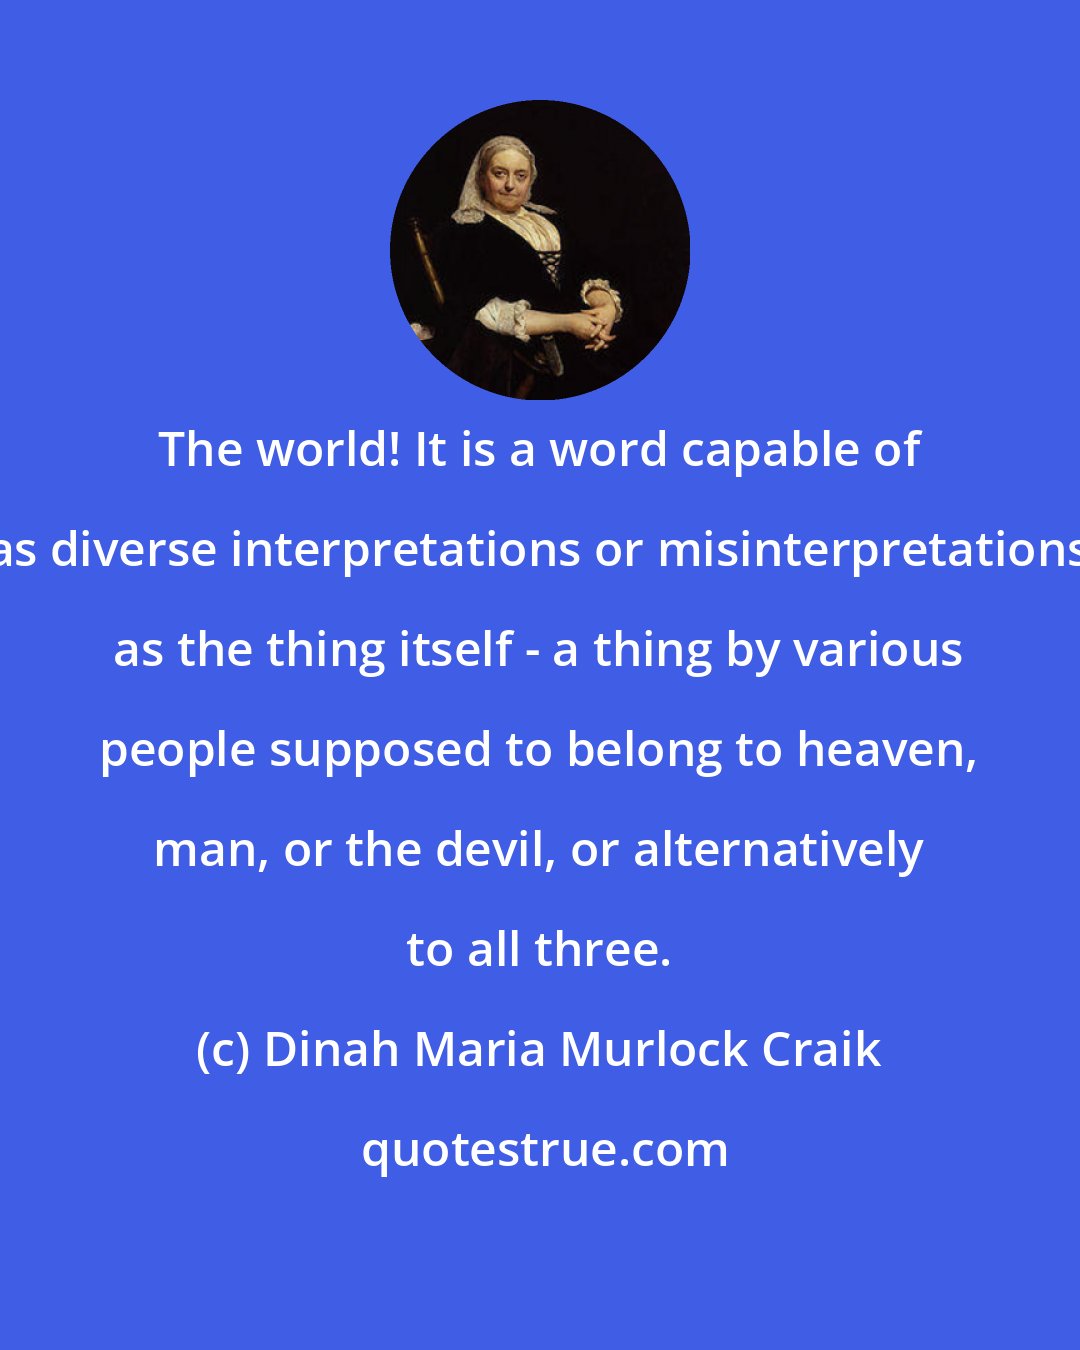 Dinah Maria Murlock Craik: The world! It is a word capable of as diverse interpretations or misinterpretations as the thing itself - a thing by various people supposed to belong to heaven, man, or the devil, or alternatively to all three.